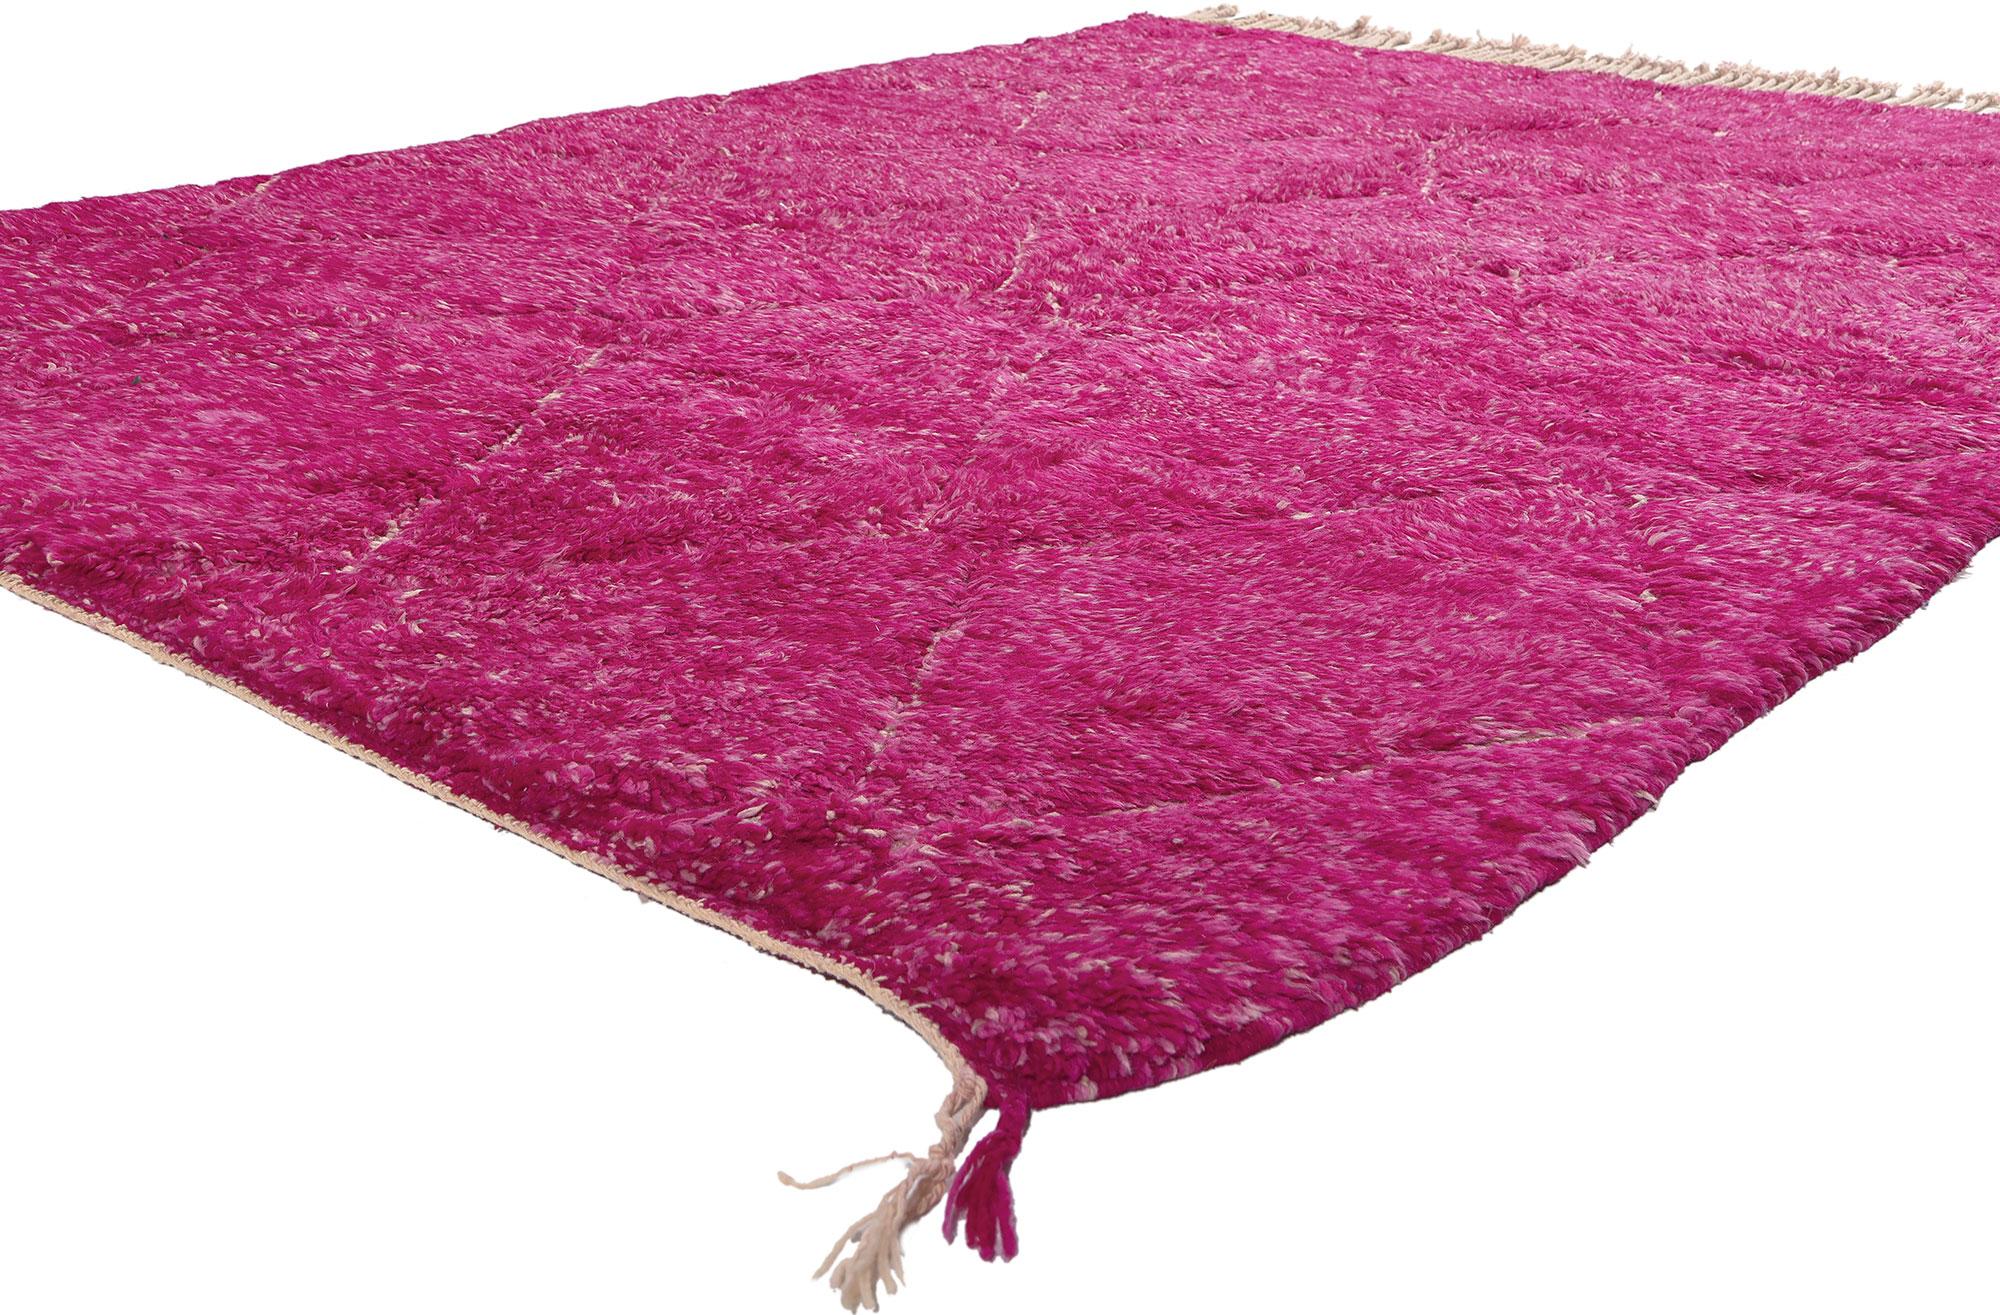 21048 Modern Beni Mrirt Pink Magenta Moroccan Rug, 06'02 x 08'04.

Embark on a stunning journey through the enchanting realm of Maximalist aesthetics with this hand-knotted wool Beni Mrirt Moroccan rug—an exquisite masterpiece originating from the